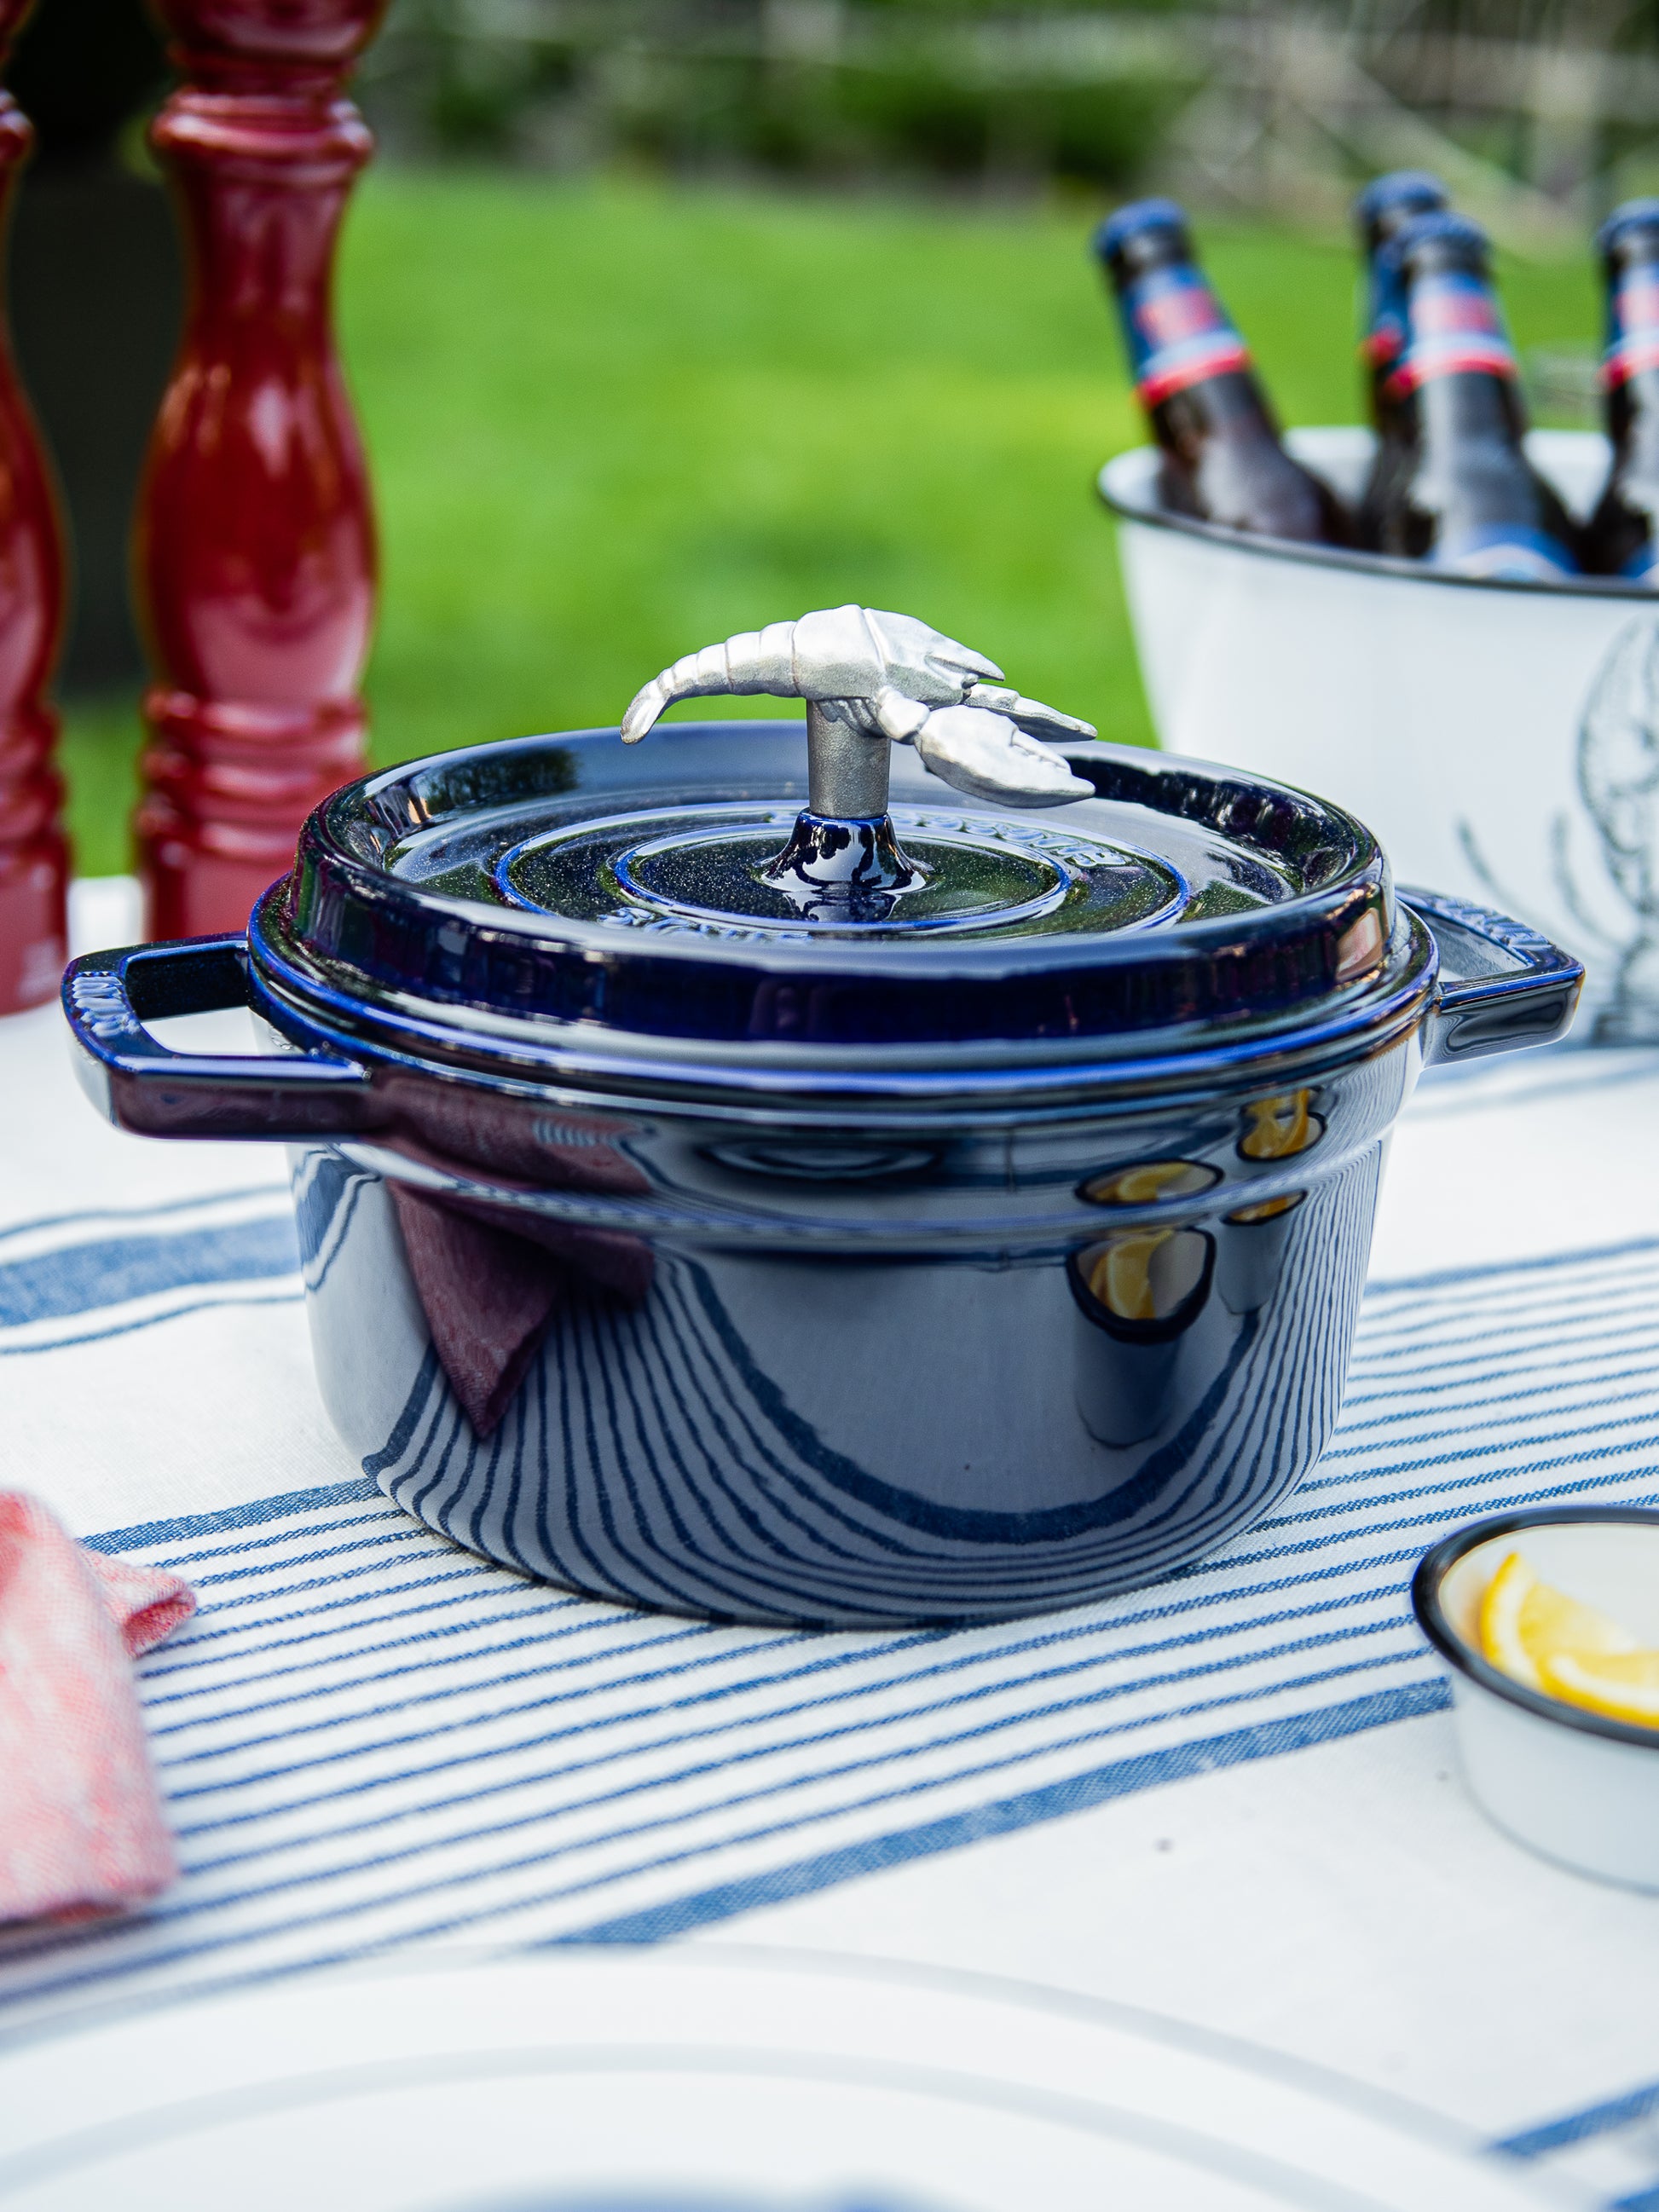 Today's the Last Day To Get a Staub Cocotte for $100 at Sur La Table